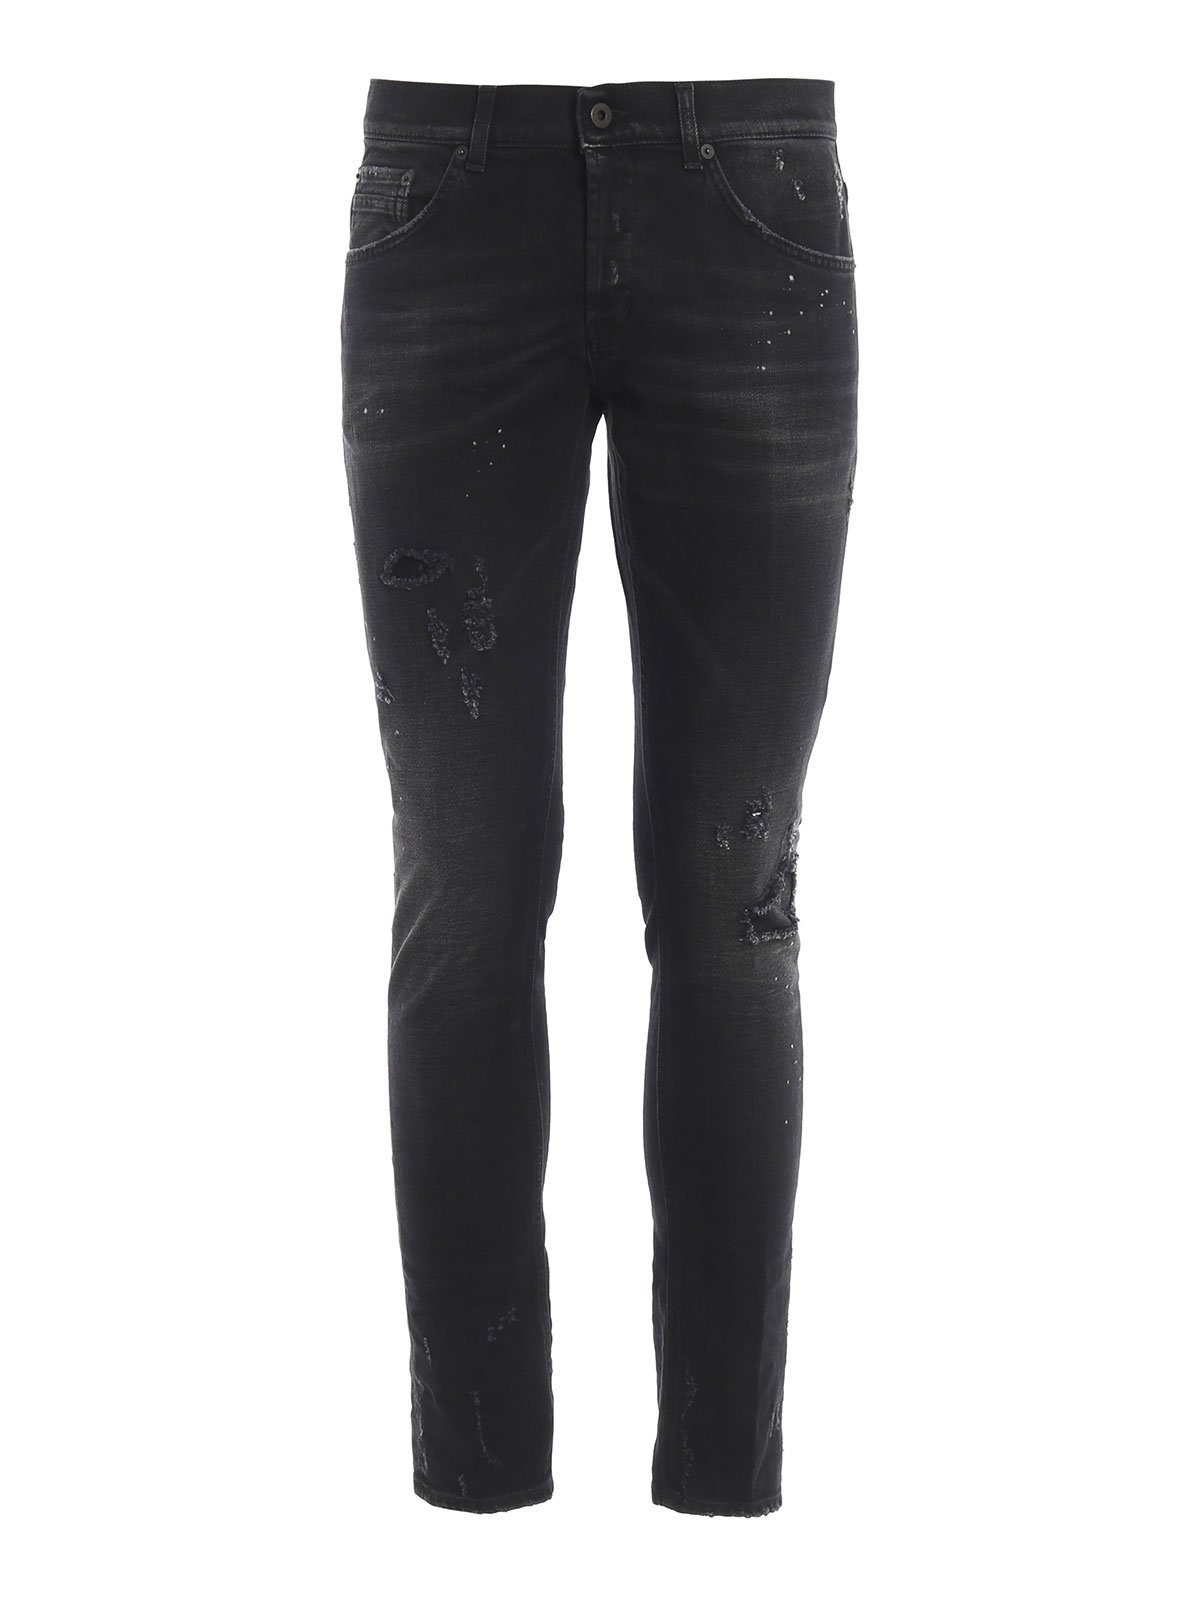 Skinny jeans Dondup - Ritchie ripped and spotted skinny jeans ...